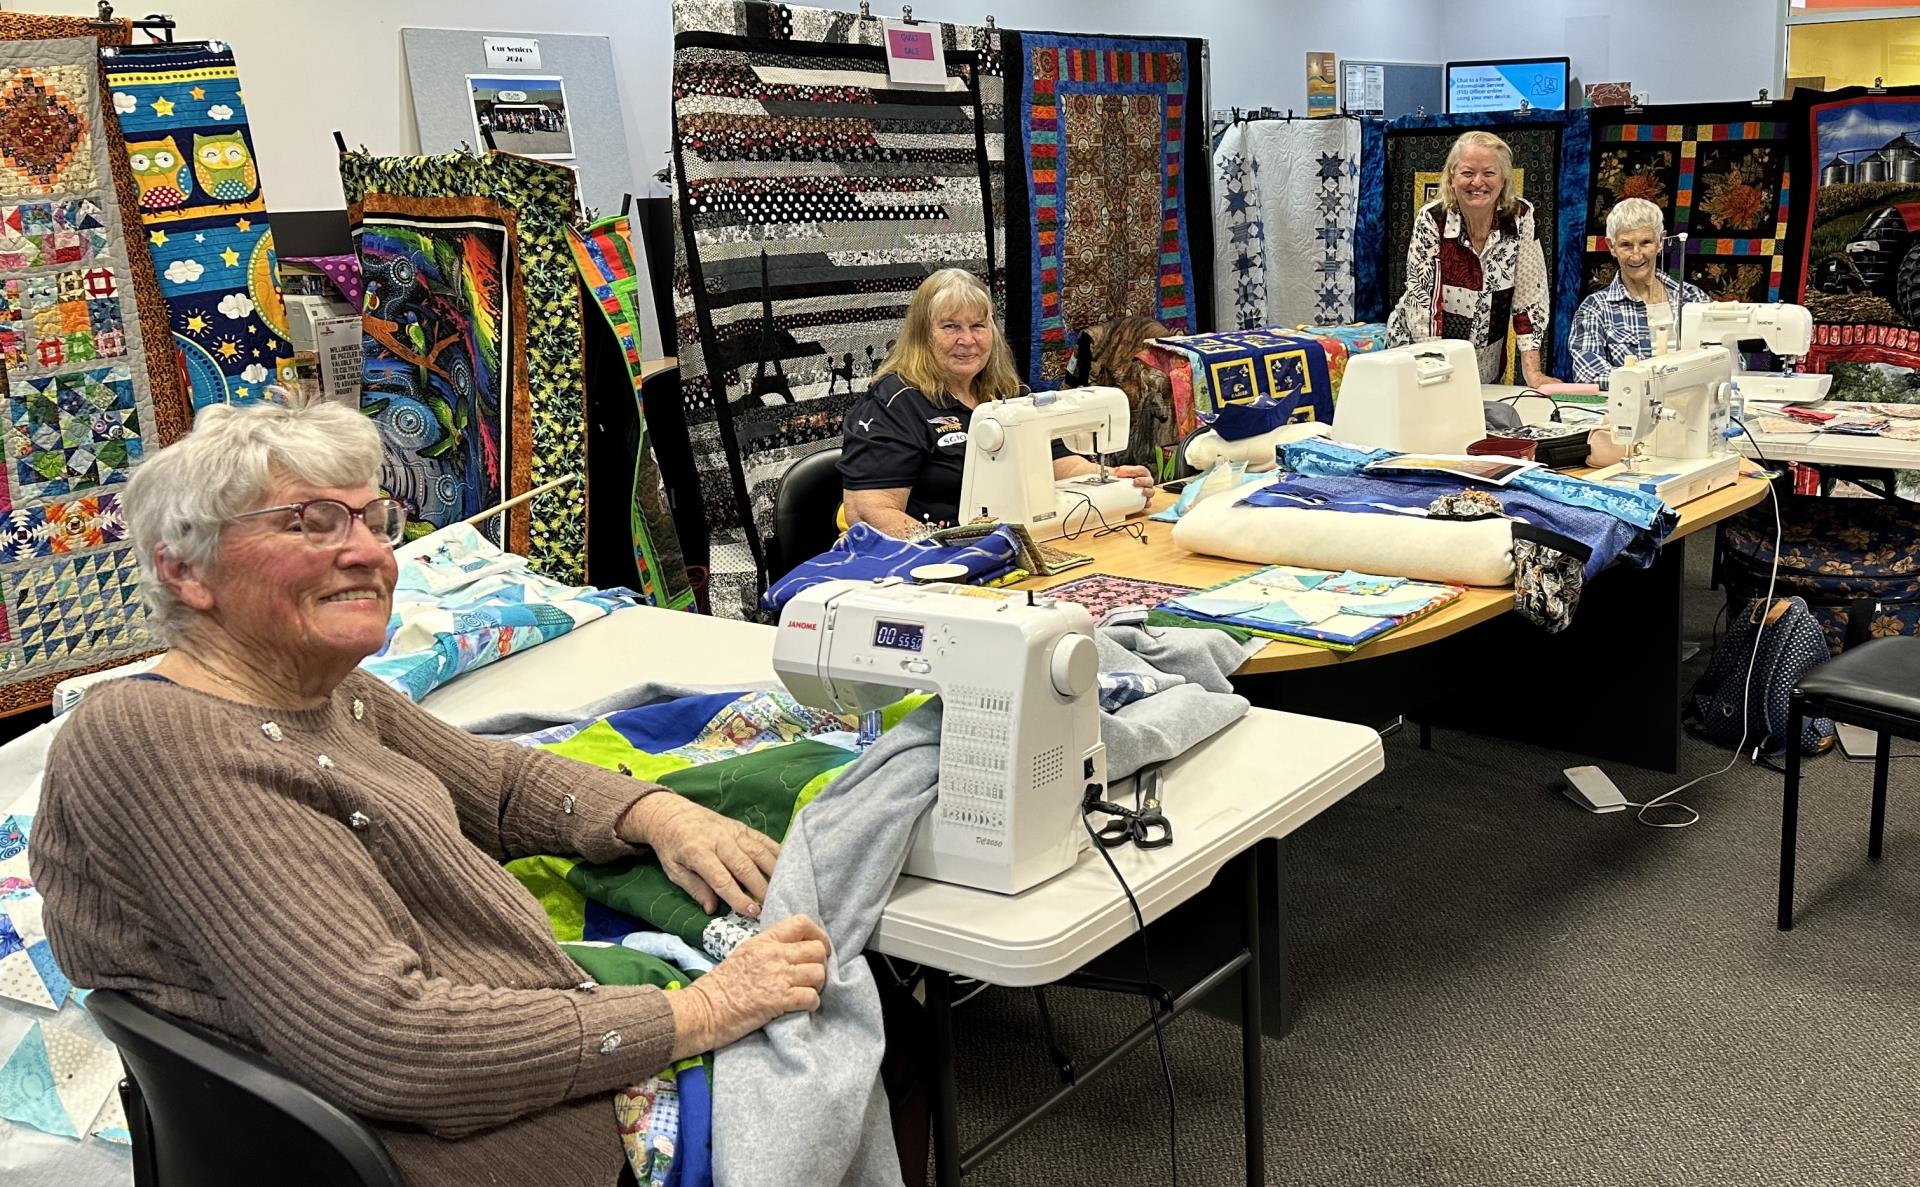 Stitching Stories: The Artistry of Kambalda's Quirky Quilters